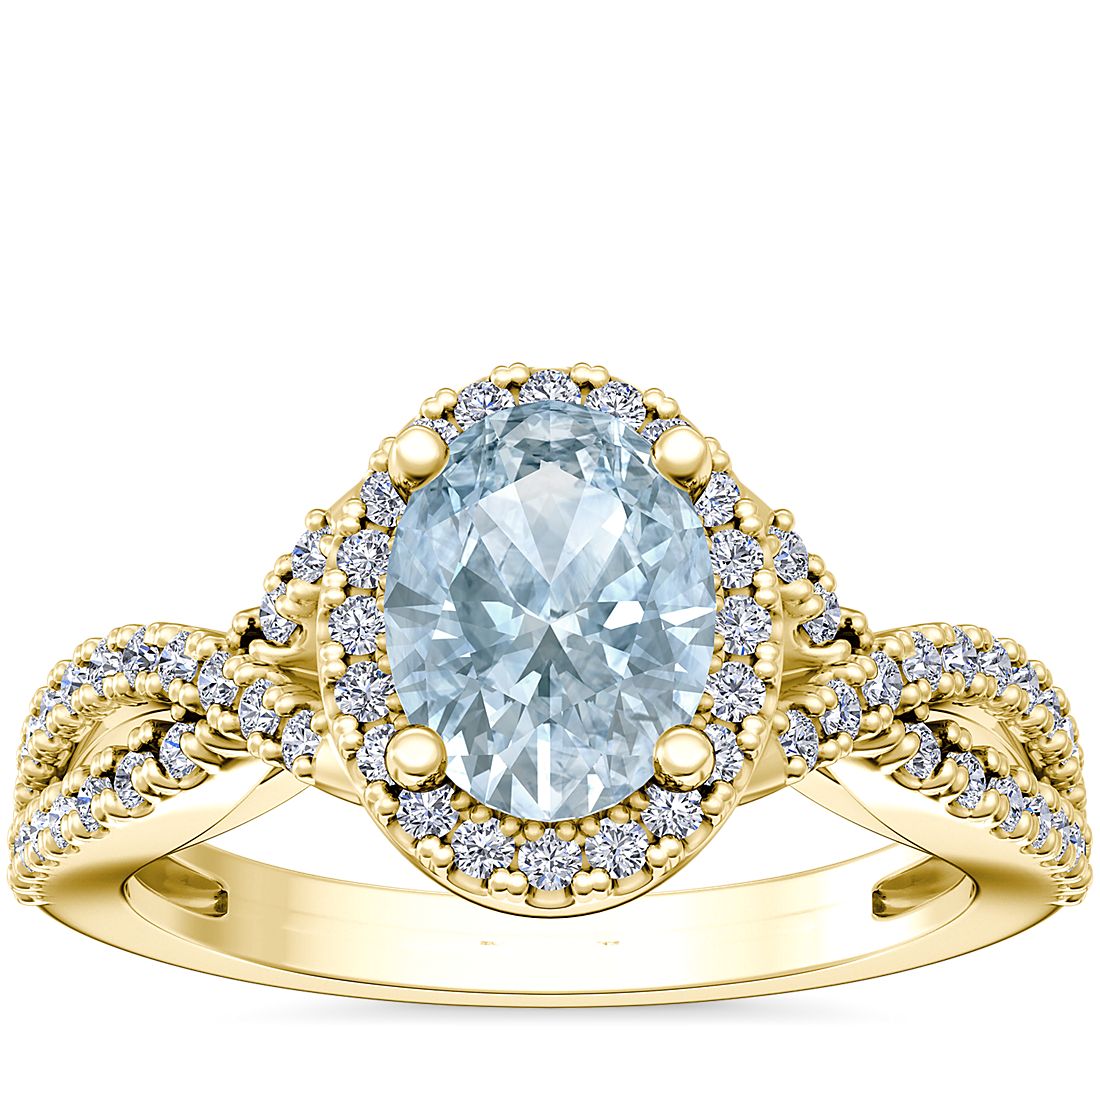 Twist Halo Diamond Engagement Ring with Oval Aquamarine in 14k Yellow Gold (8x6mm)